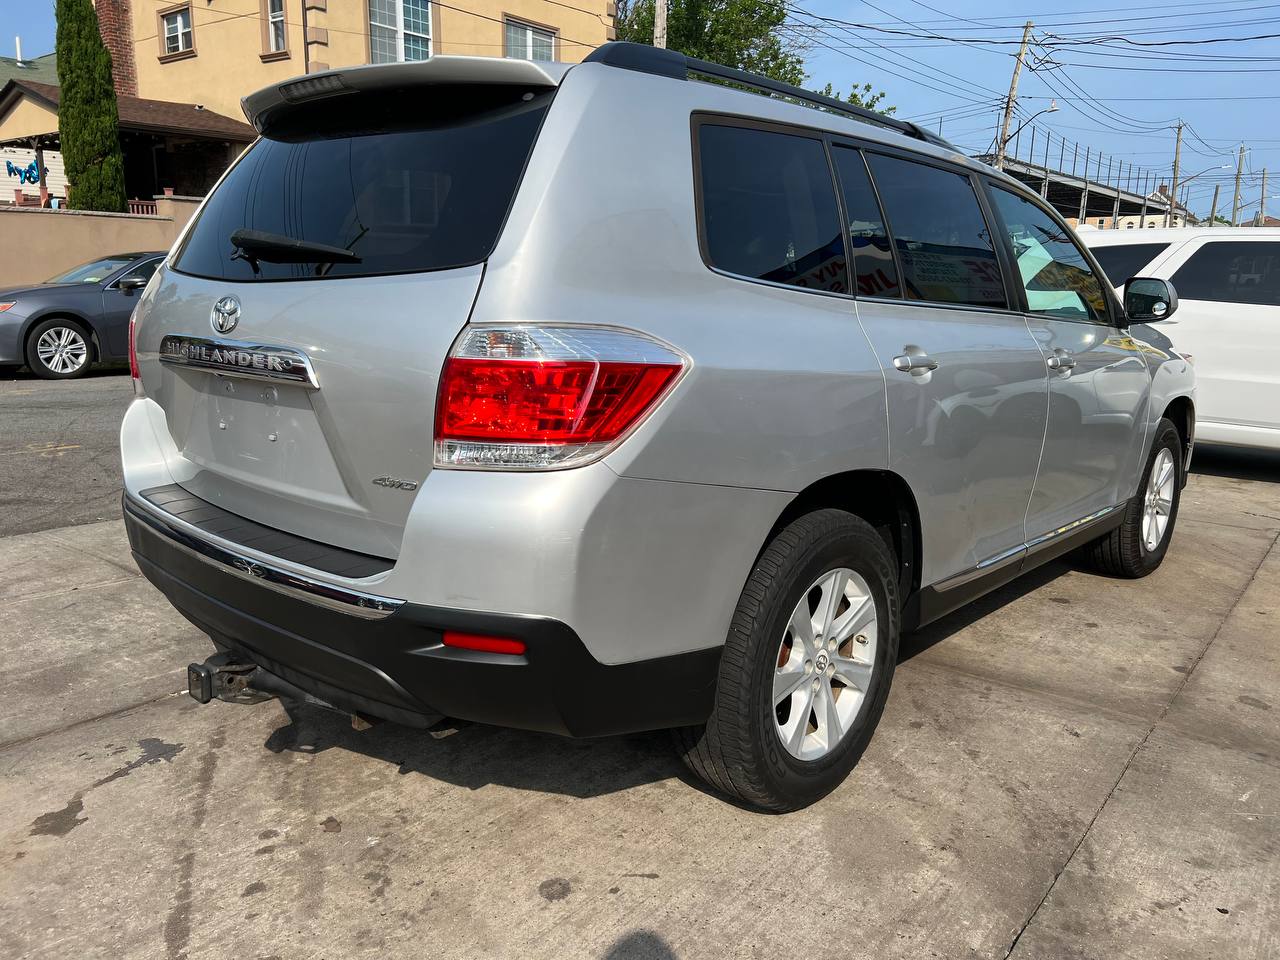 Used - Toyota Highlander SE AWD SUV for sale in Staten Island NY